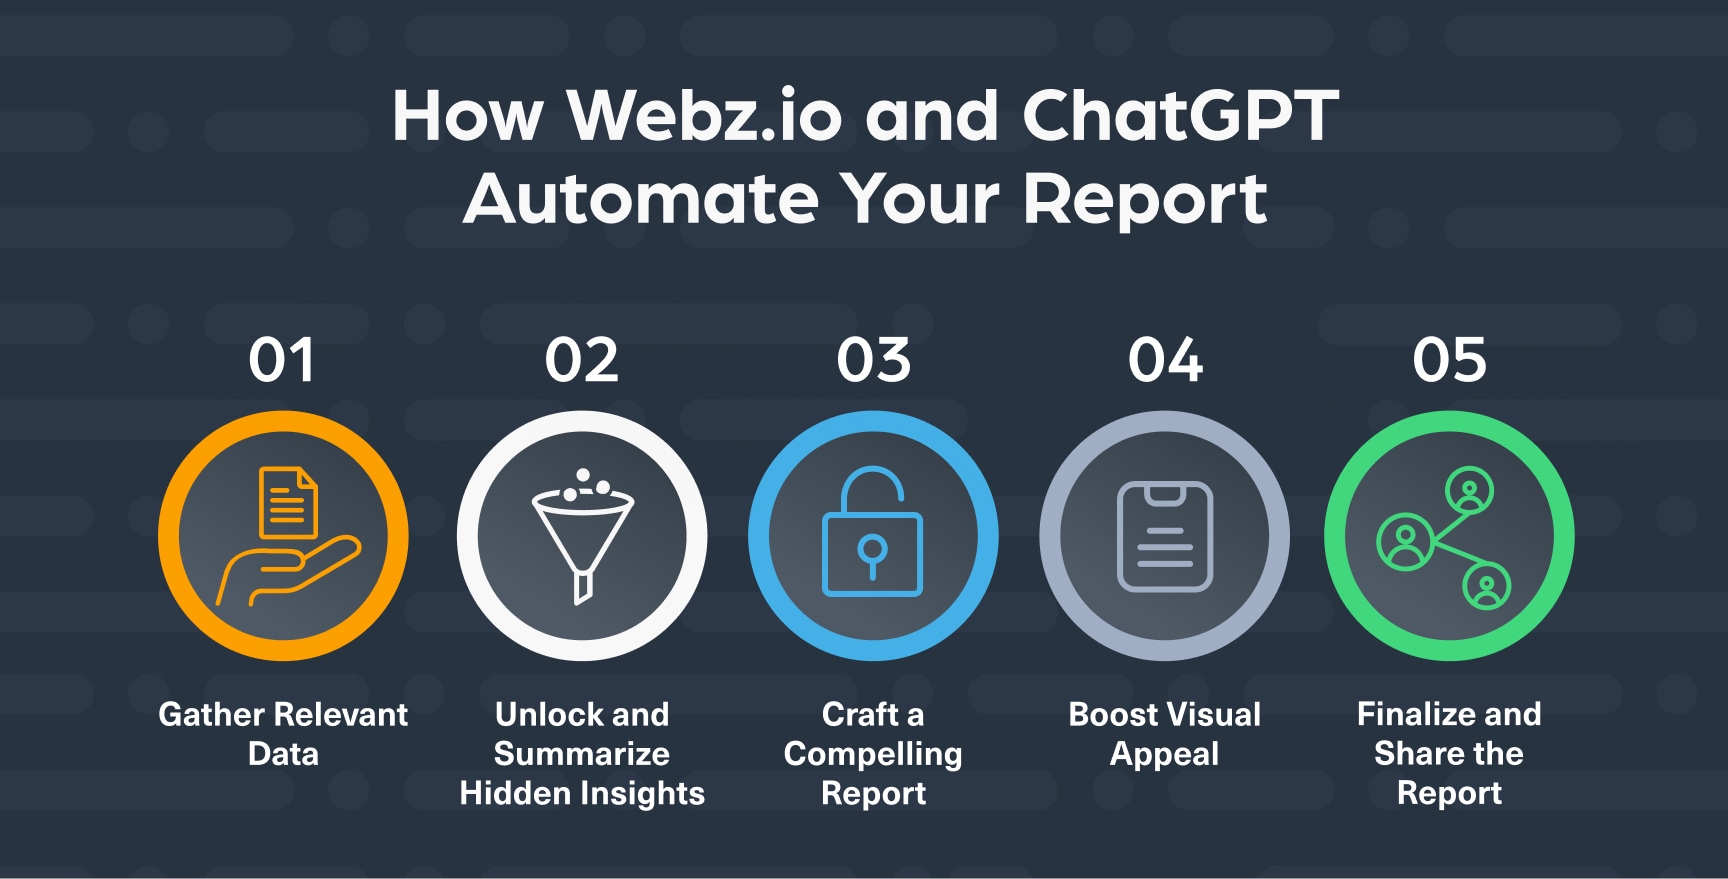 How Webz.io and ChatGPT automate your report